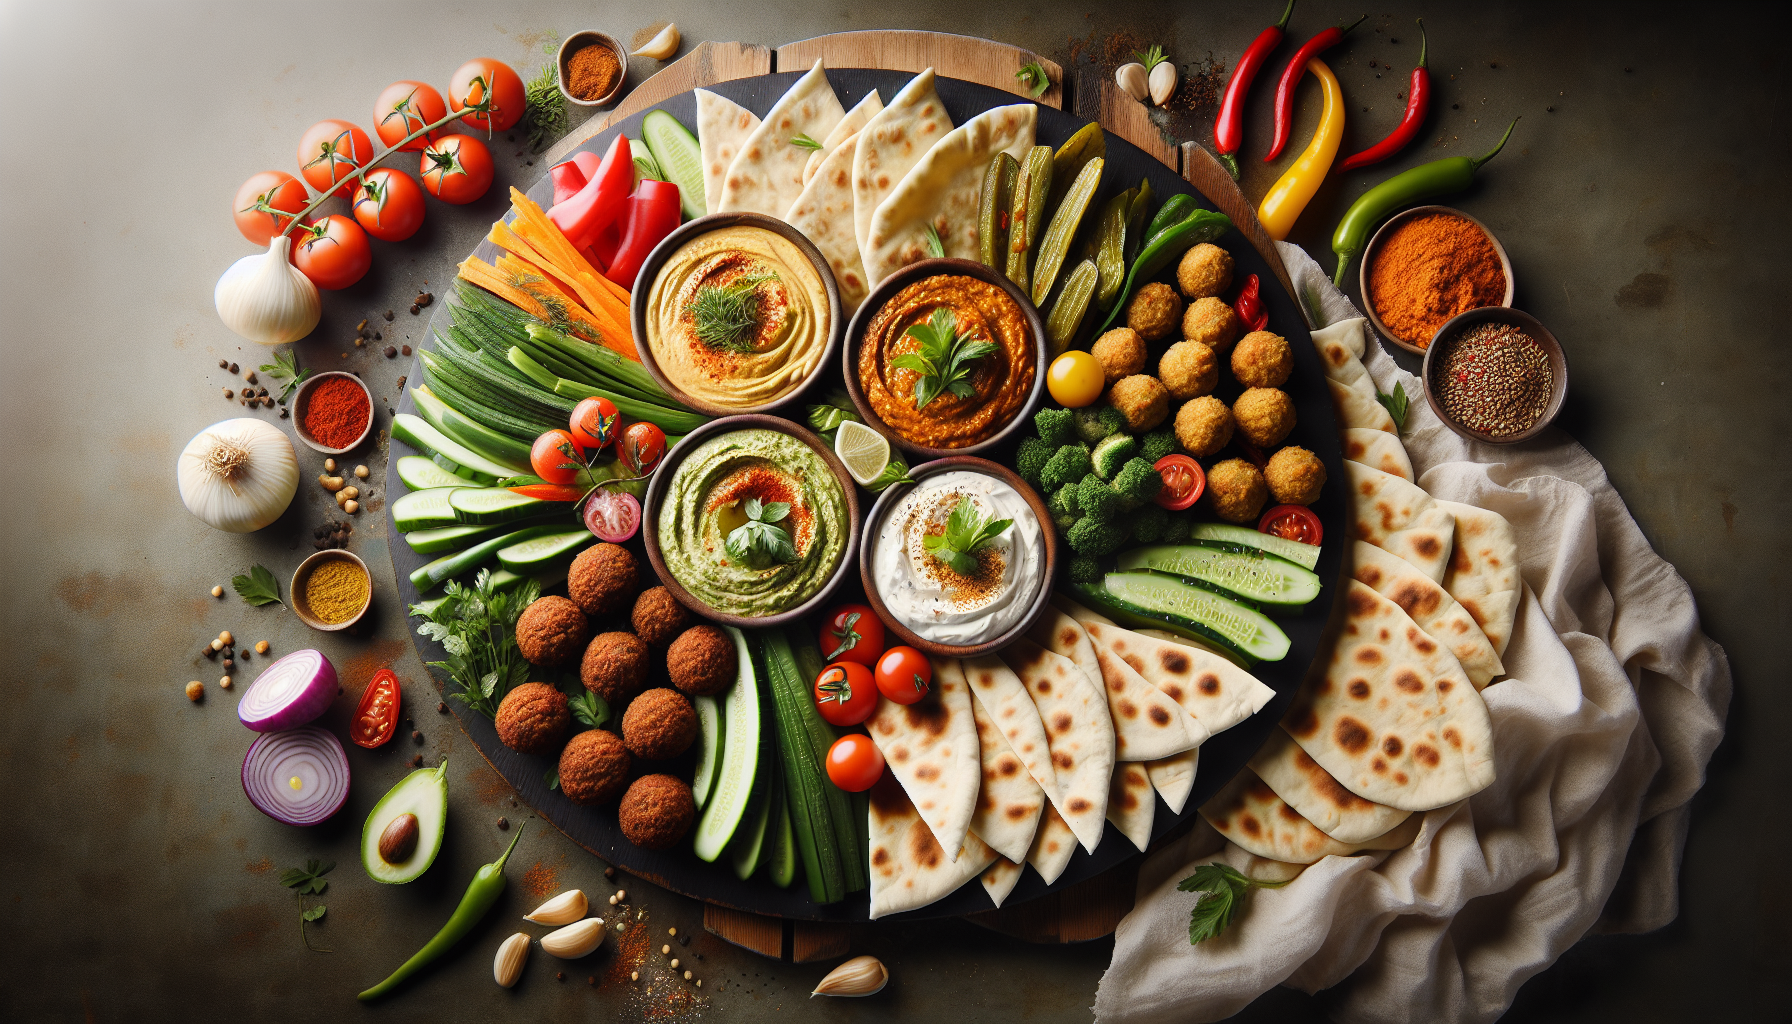 Share Your Comforting Middle Eastern Mezze Platter With A Modern Twist.